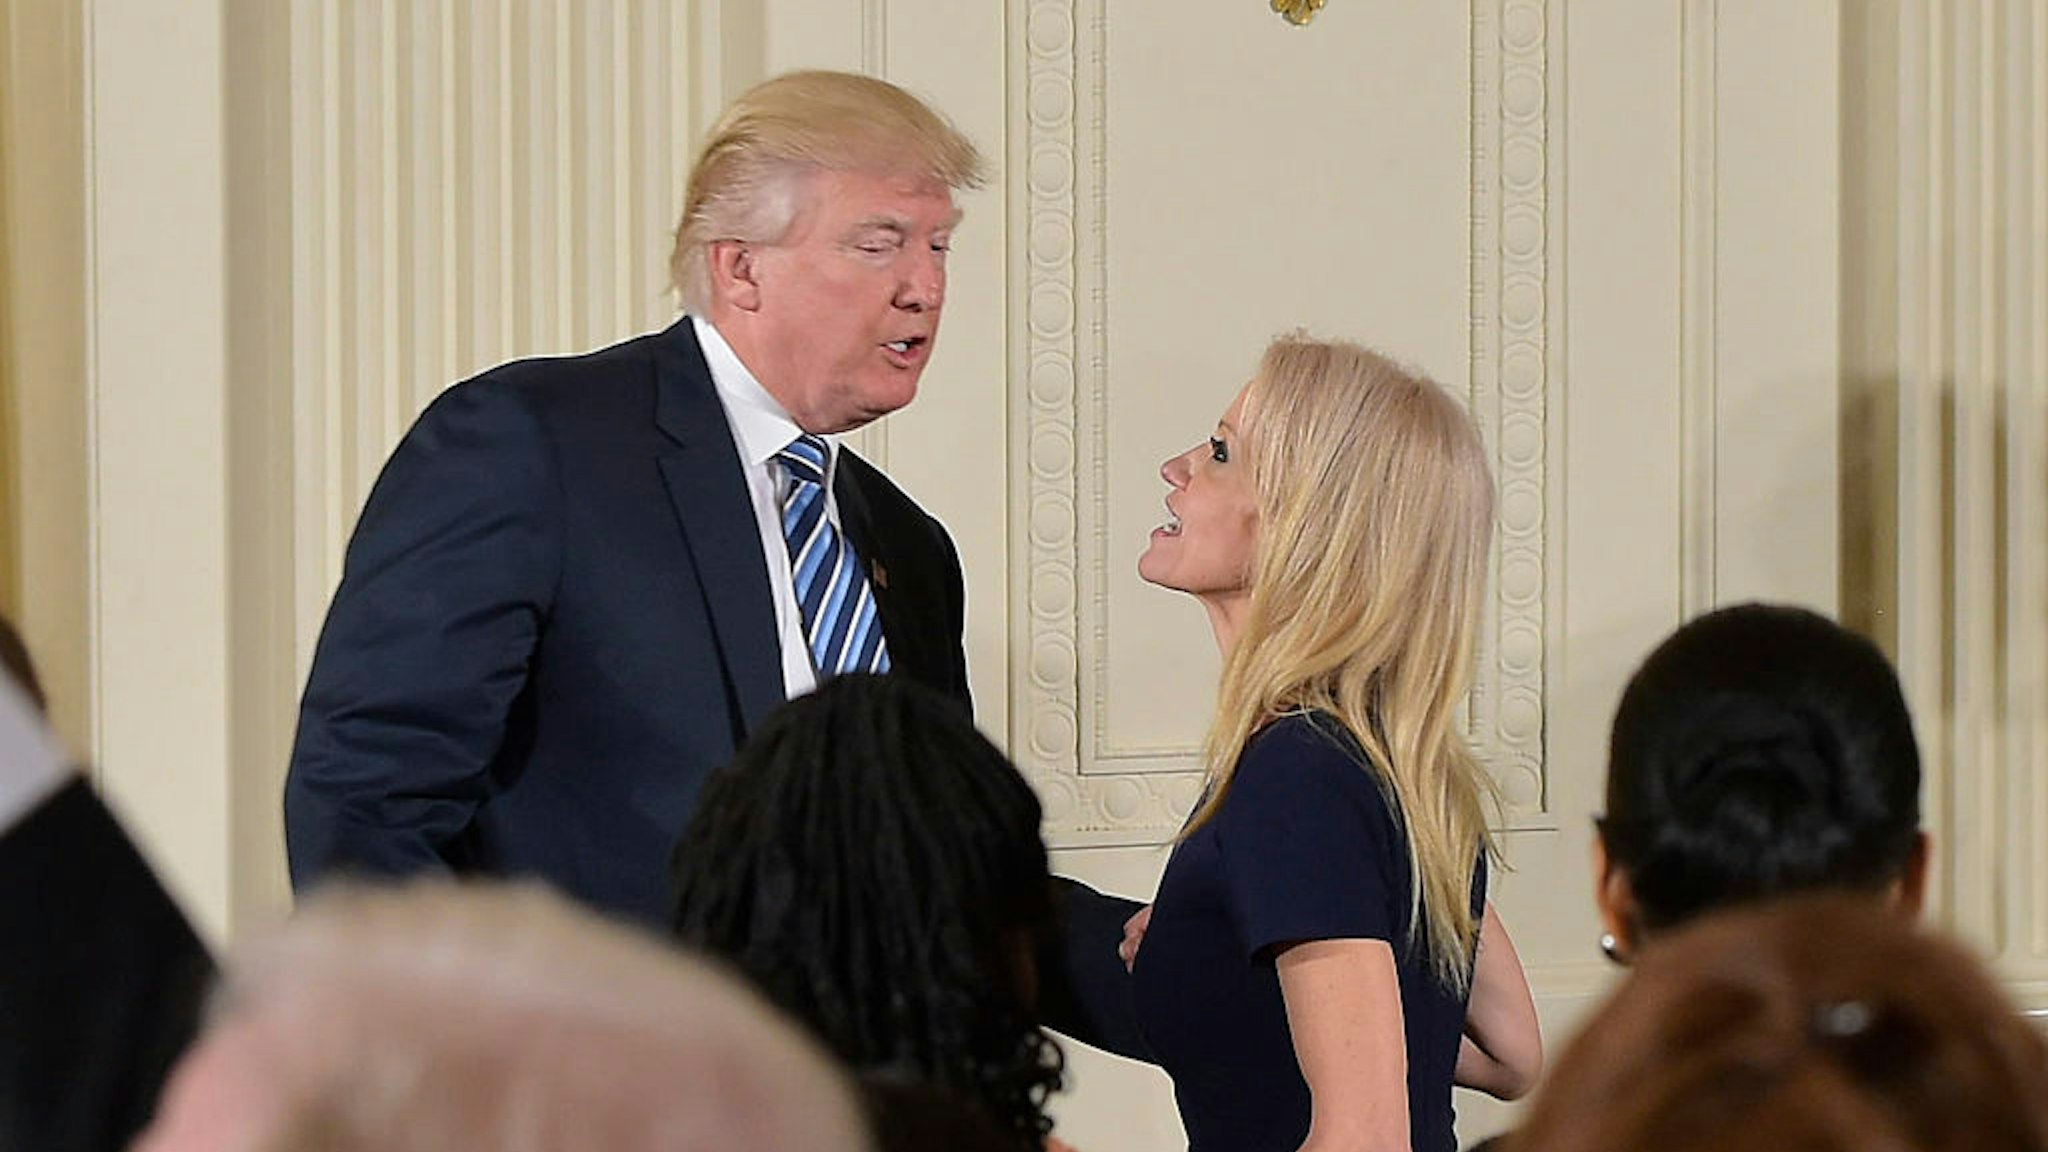 US President Donald Trump speaks with Counselor to the President Kellyanne Conway after the swearing in of the White House senior staff at the White House on January 22, 2017, in Washington, DC. / AFP / MANDEL NGAN (Photo credit should read MANDEL NGAN/AFP via Getty Images)